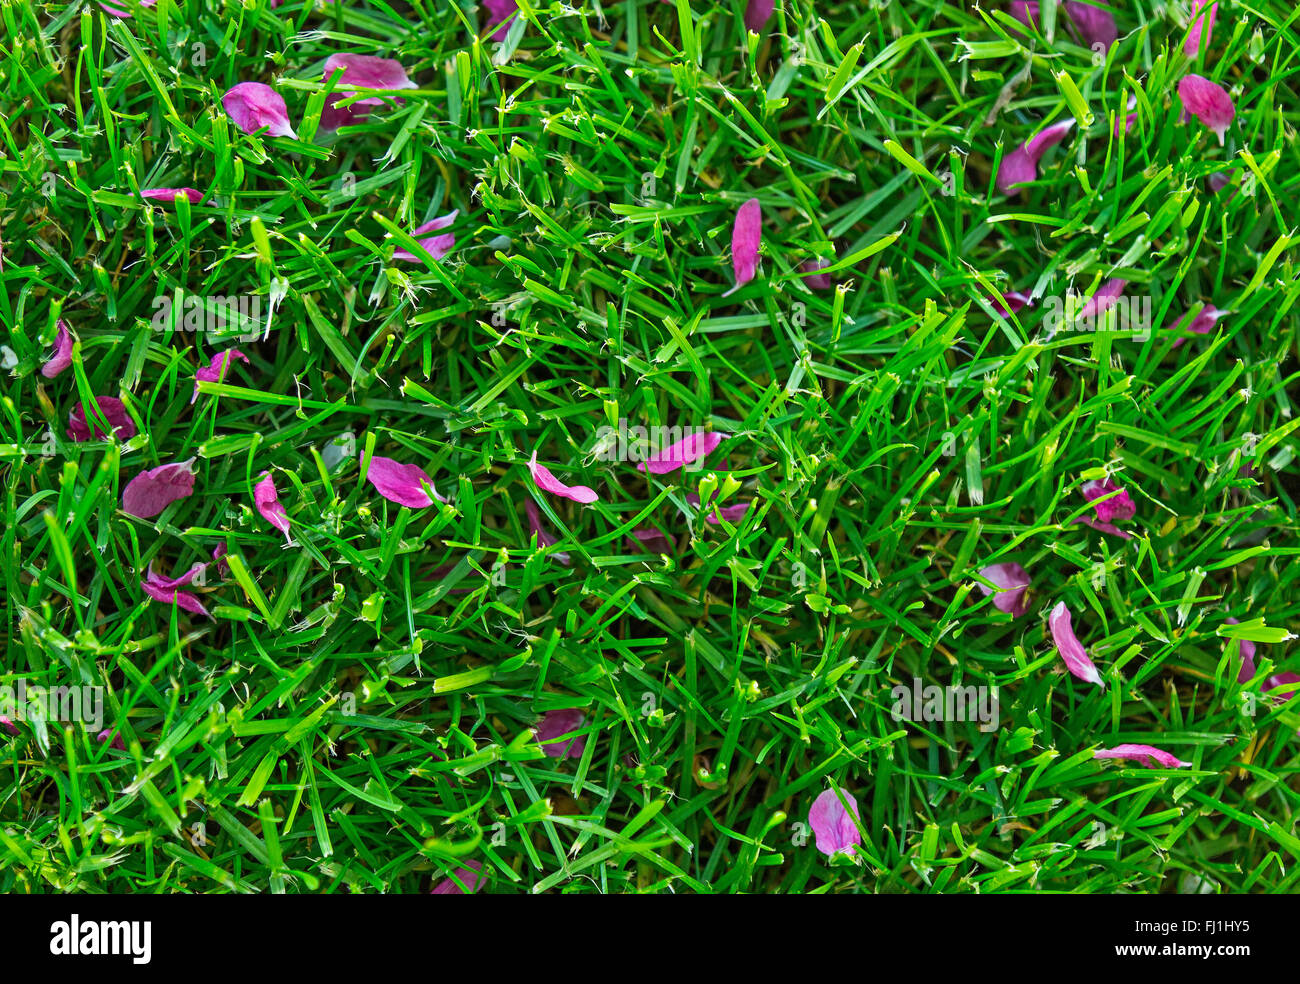 Red petals on grass.Useful as background Stock Photo